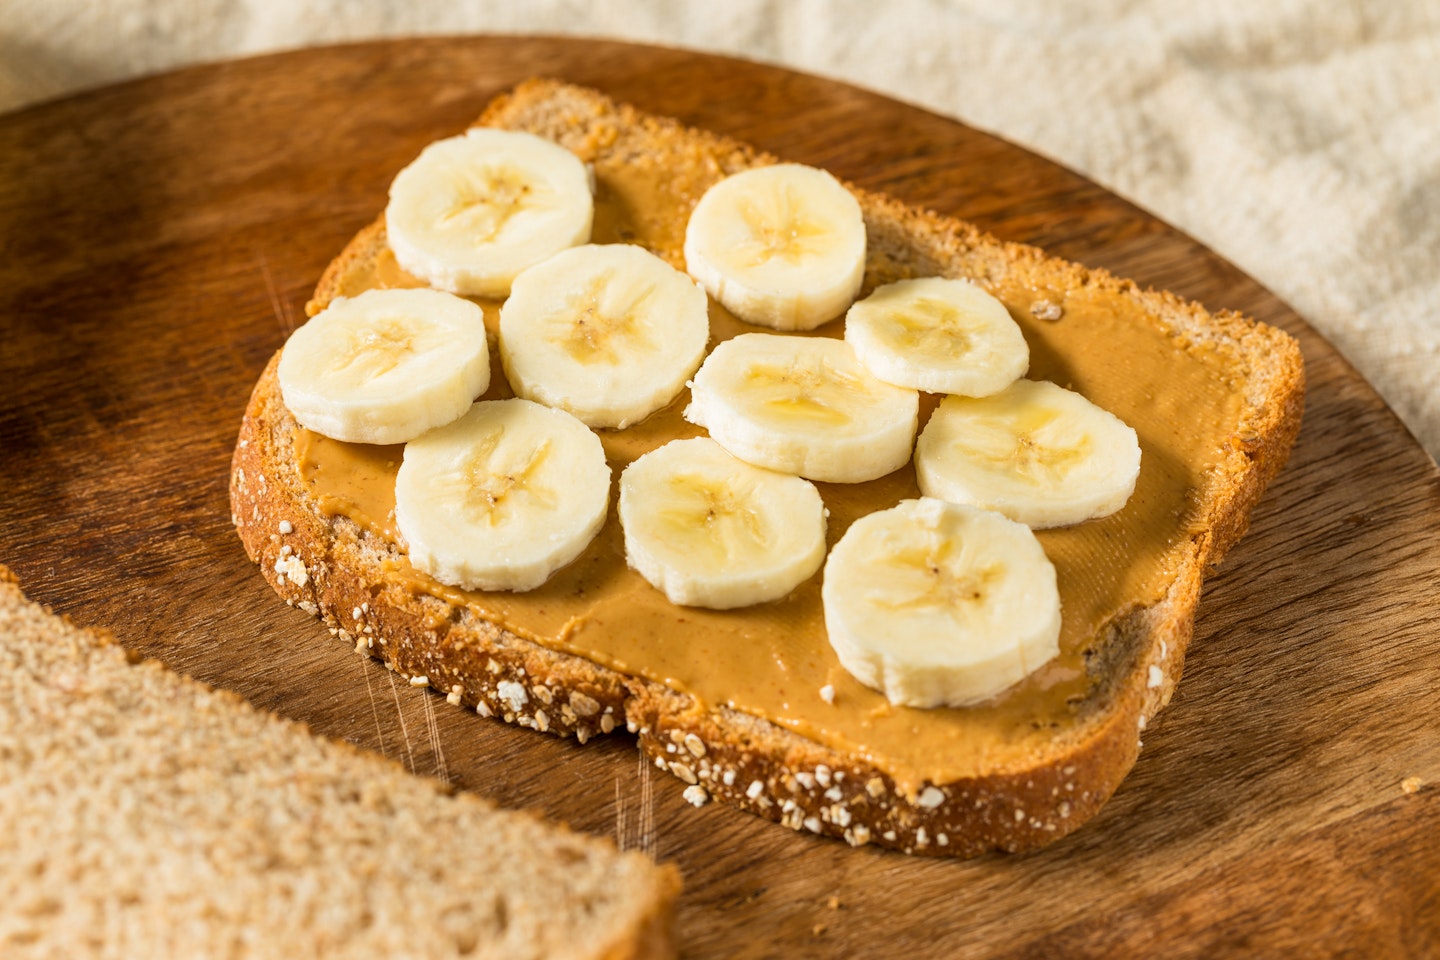 Banana and nut butter